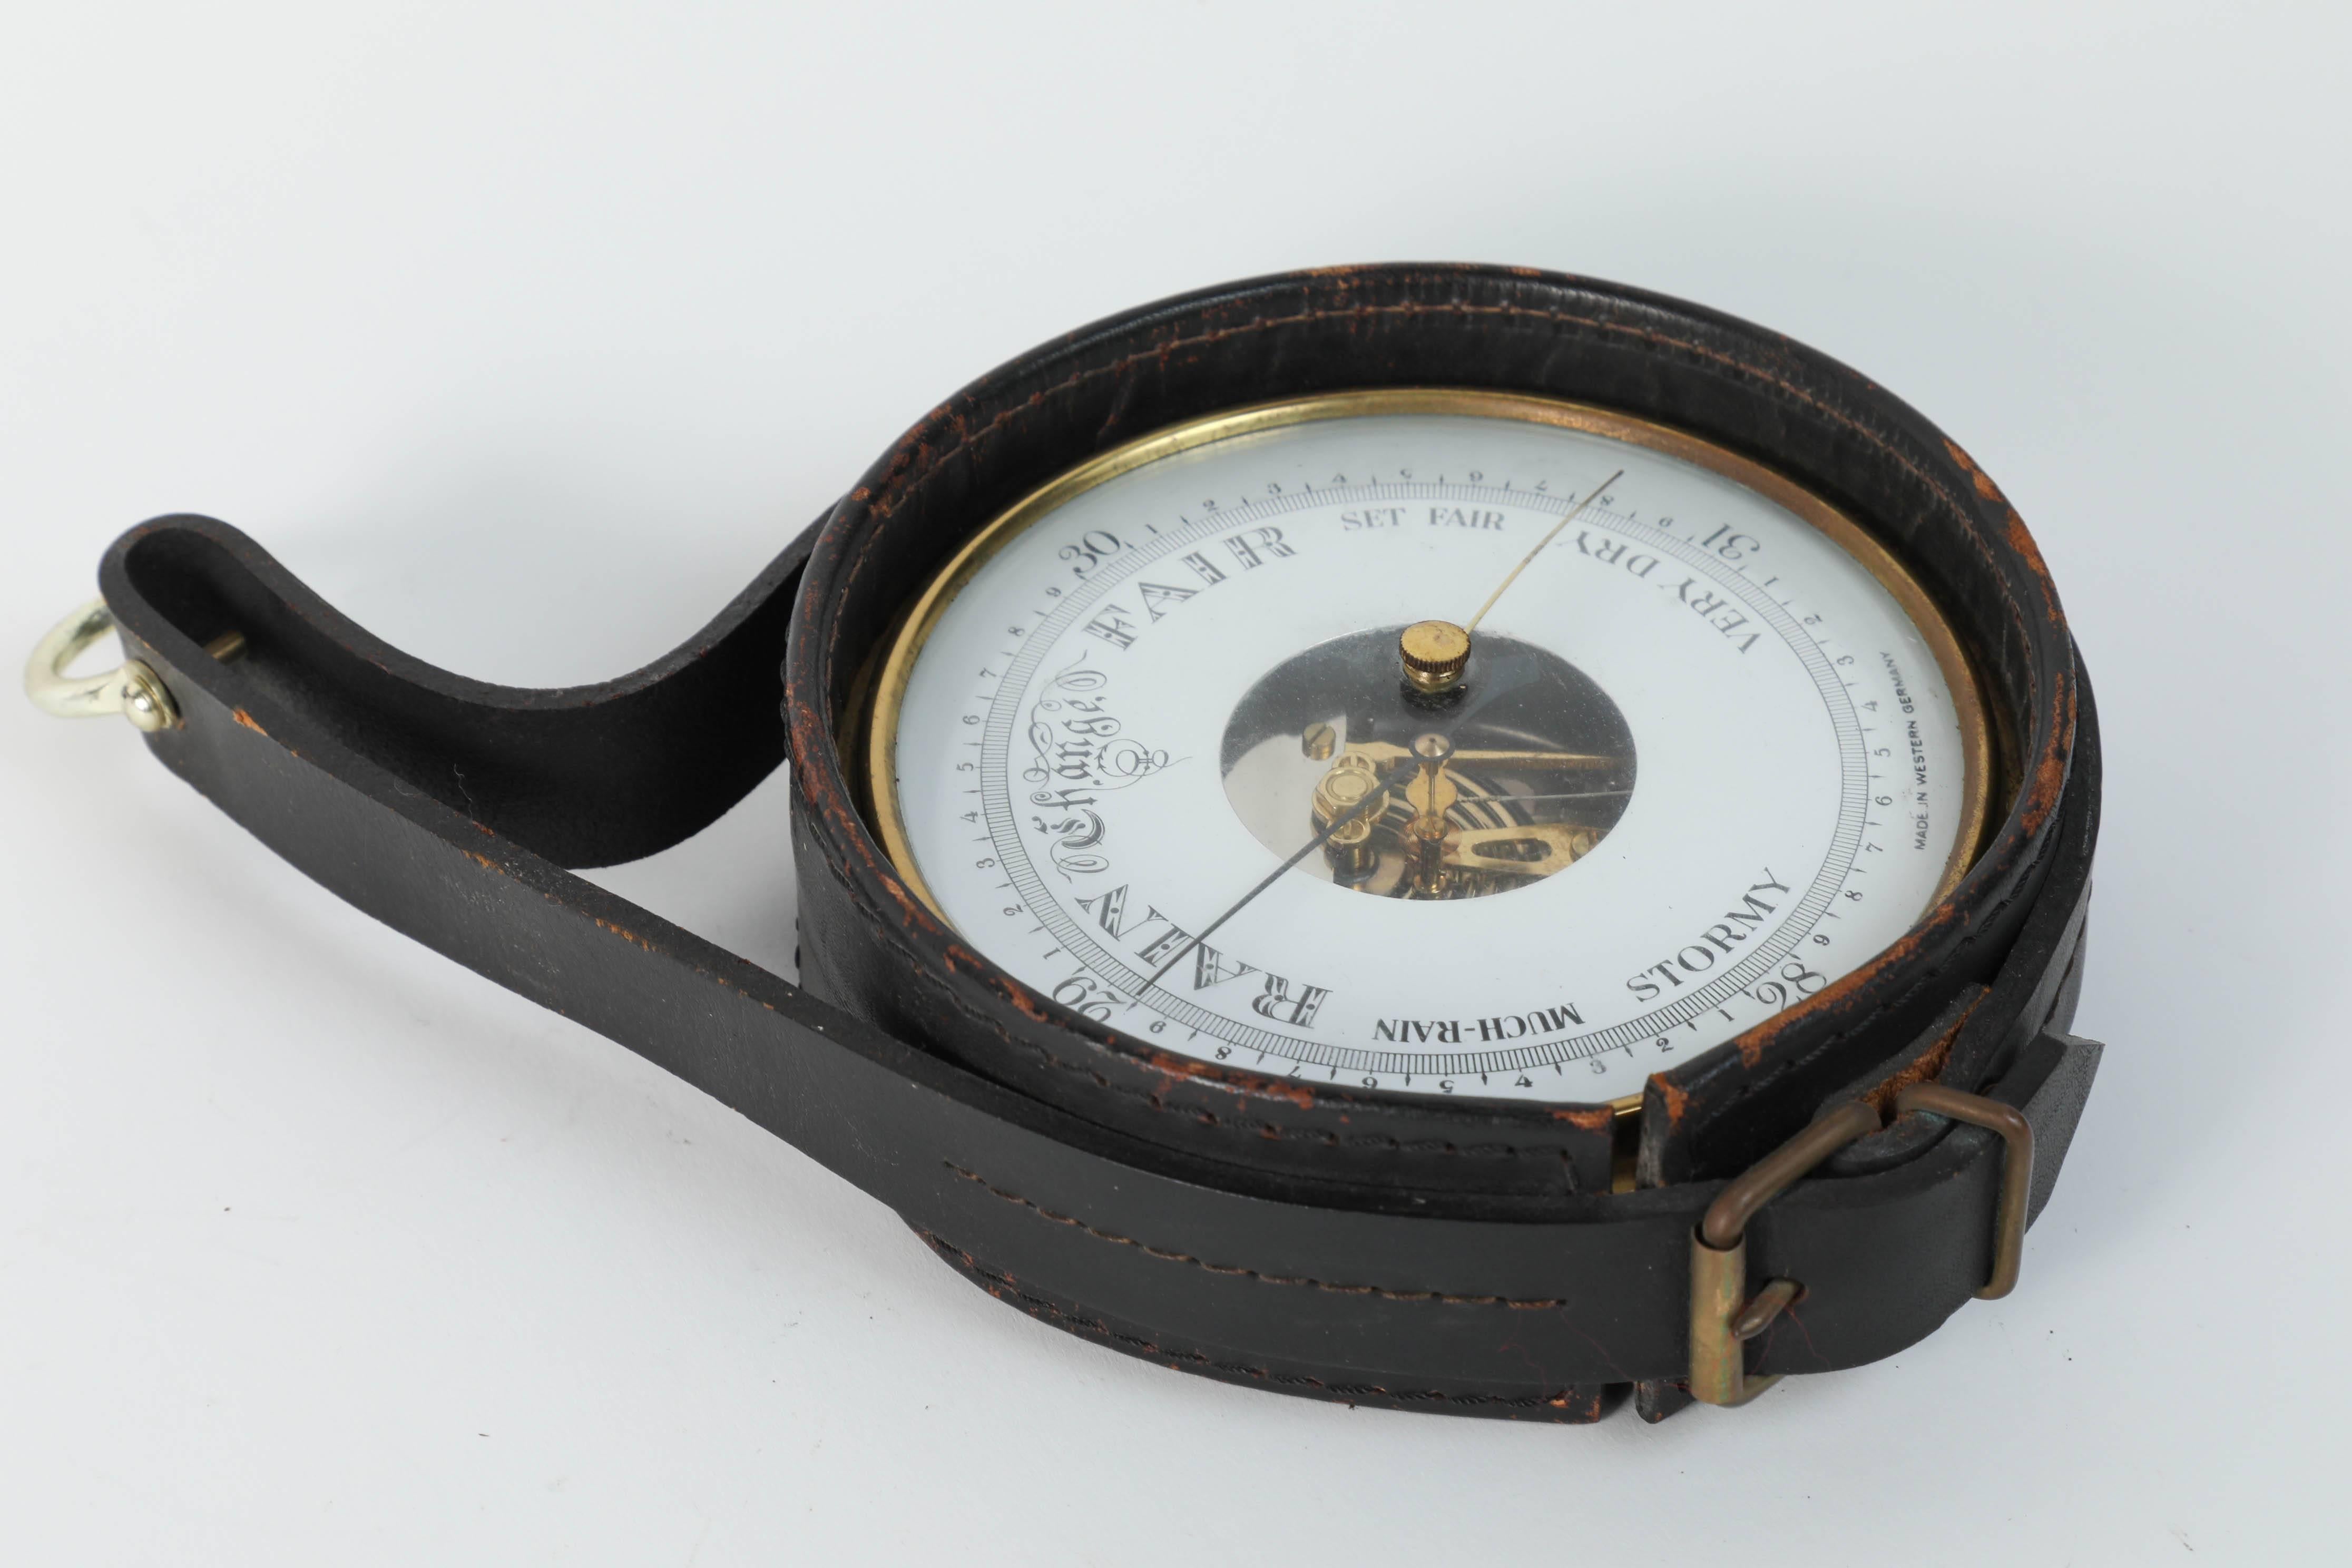 Vintage leather and brass hanging German Barometer.
Polished brass German barometer with readings in English.
Wrapped in a leather black strap with hanging bracket.
Great patina on leather in Jacques Adnet style.
Made in western Germany, marked